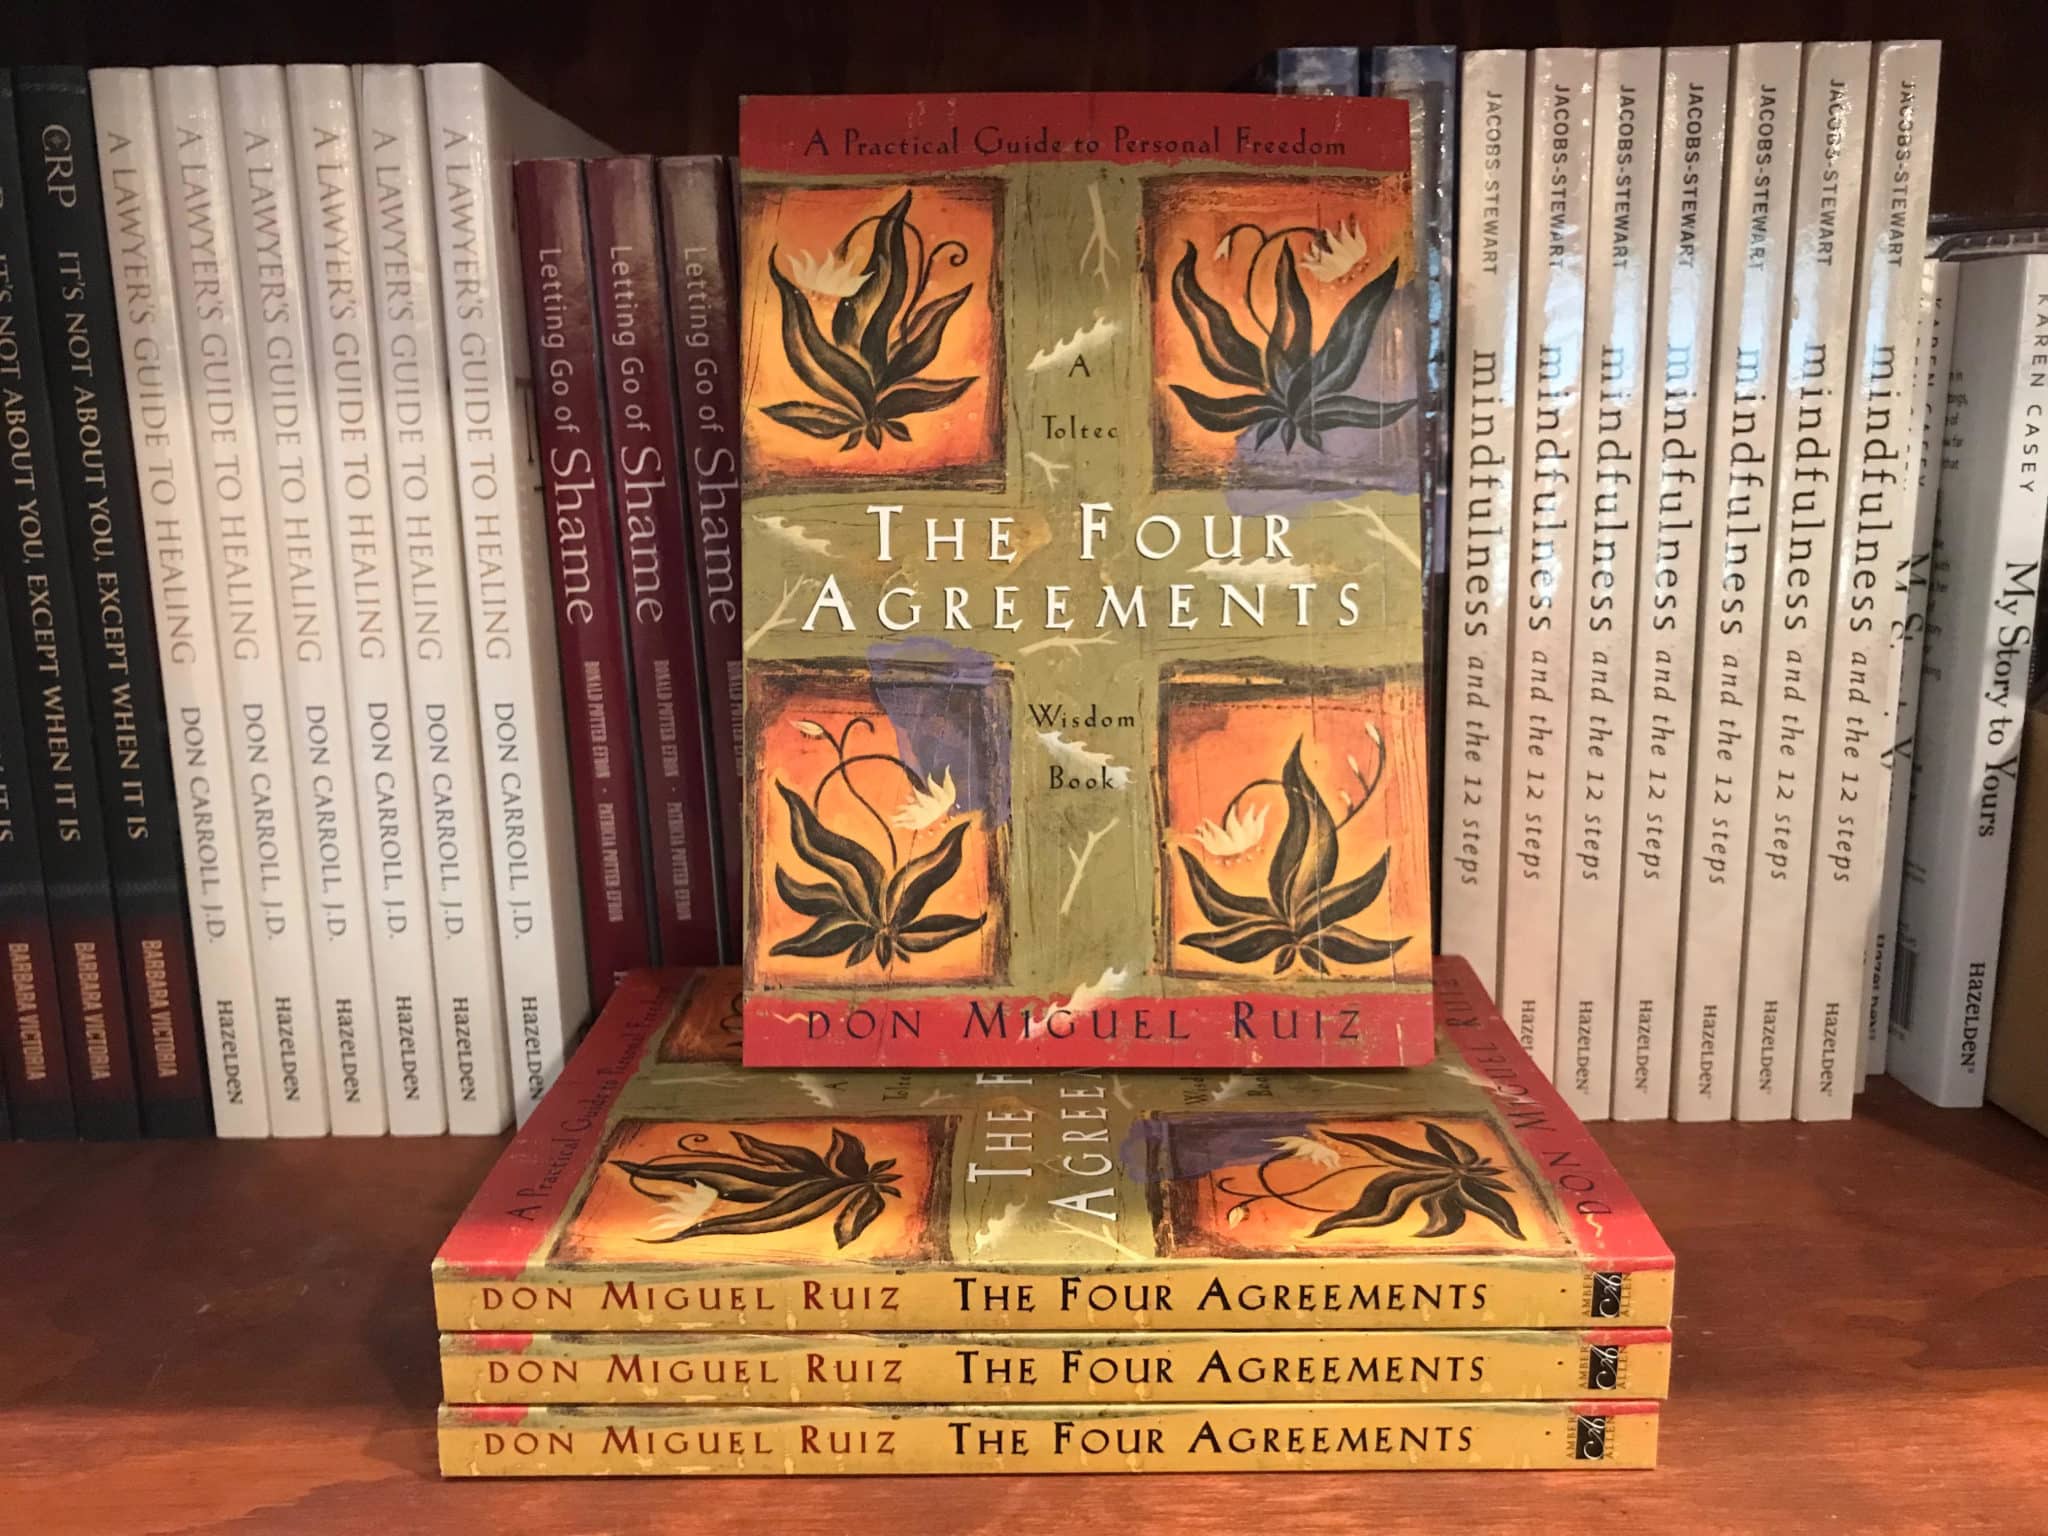 A Holiday Book Guide: The Four Agreements